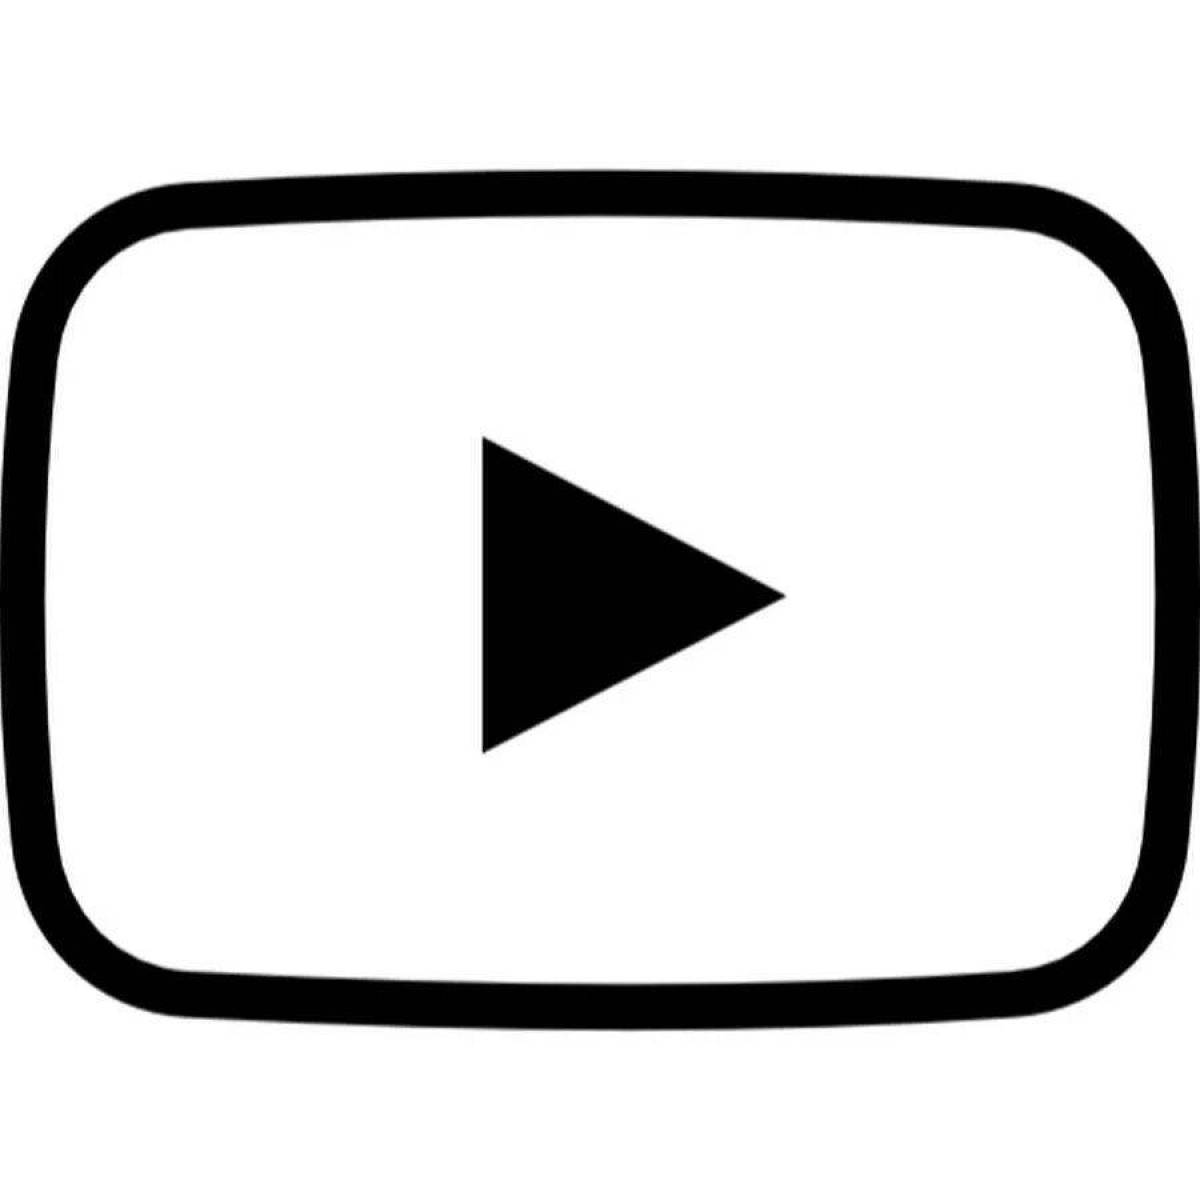 Attractive youtube logo coloring page